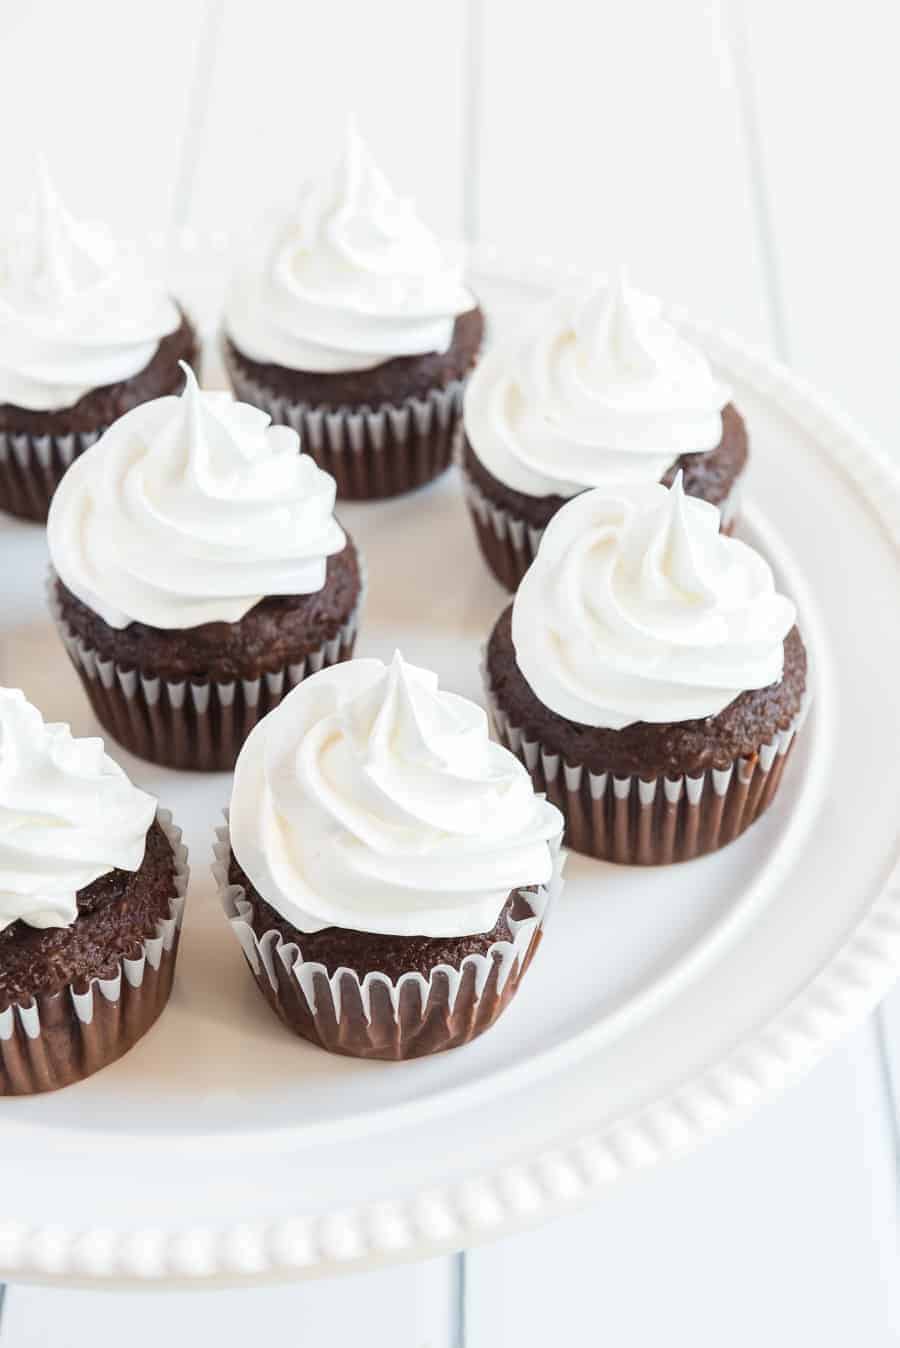 close up image of chocolate cupcakes with white frosting on a white plate.